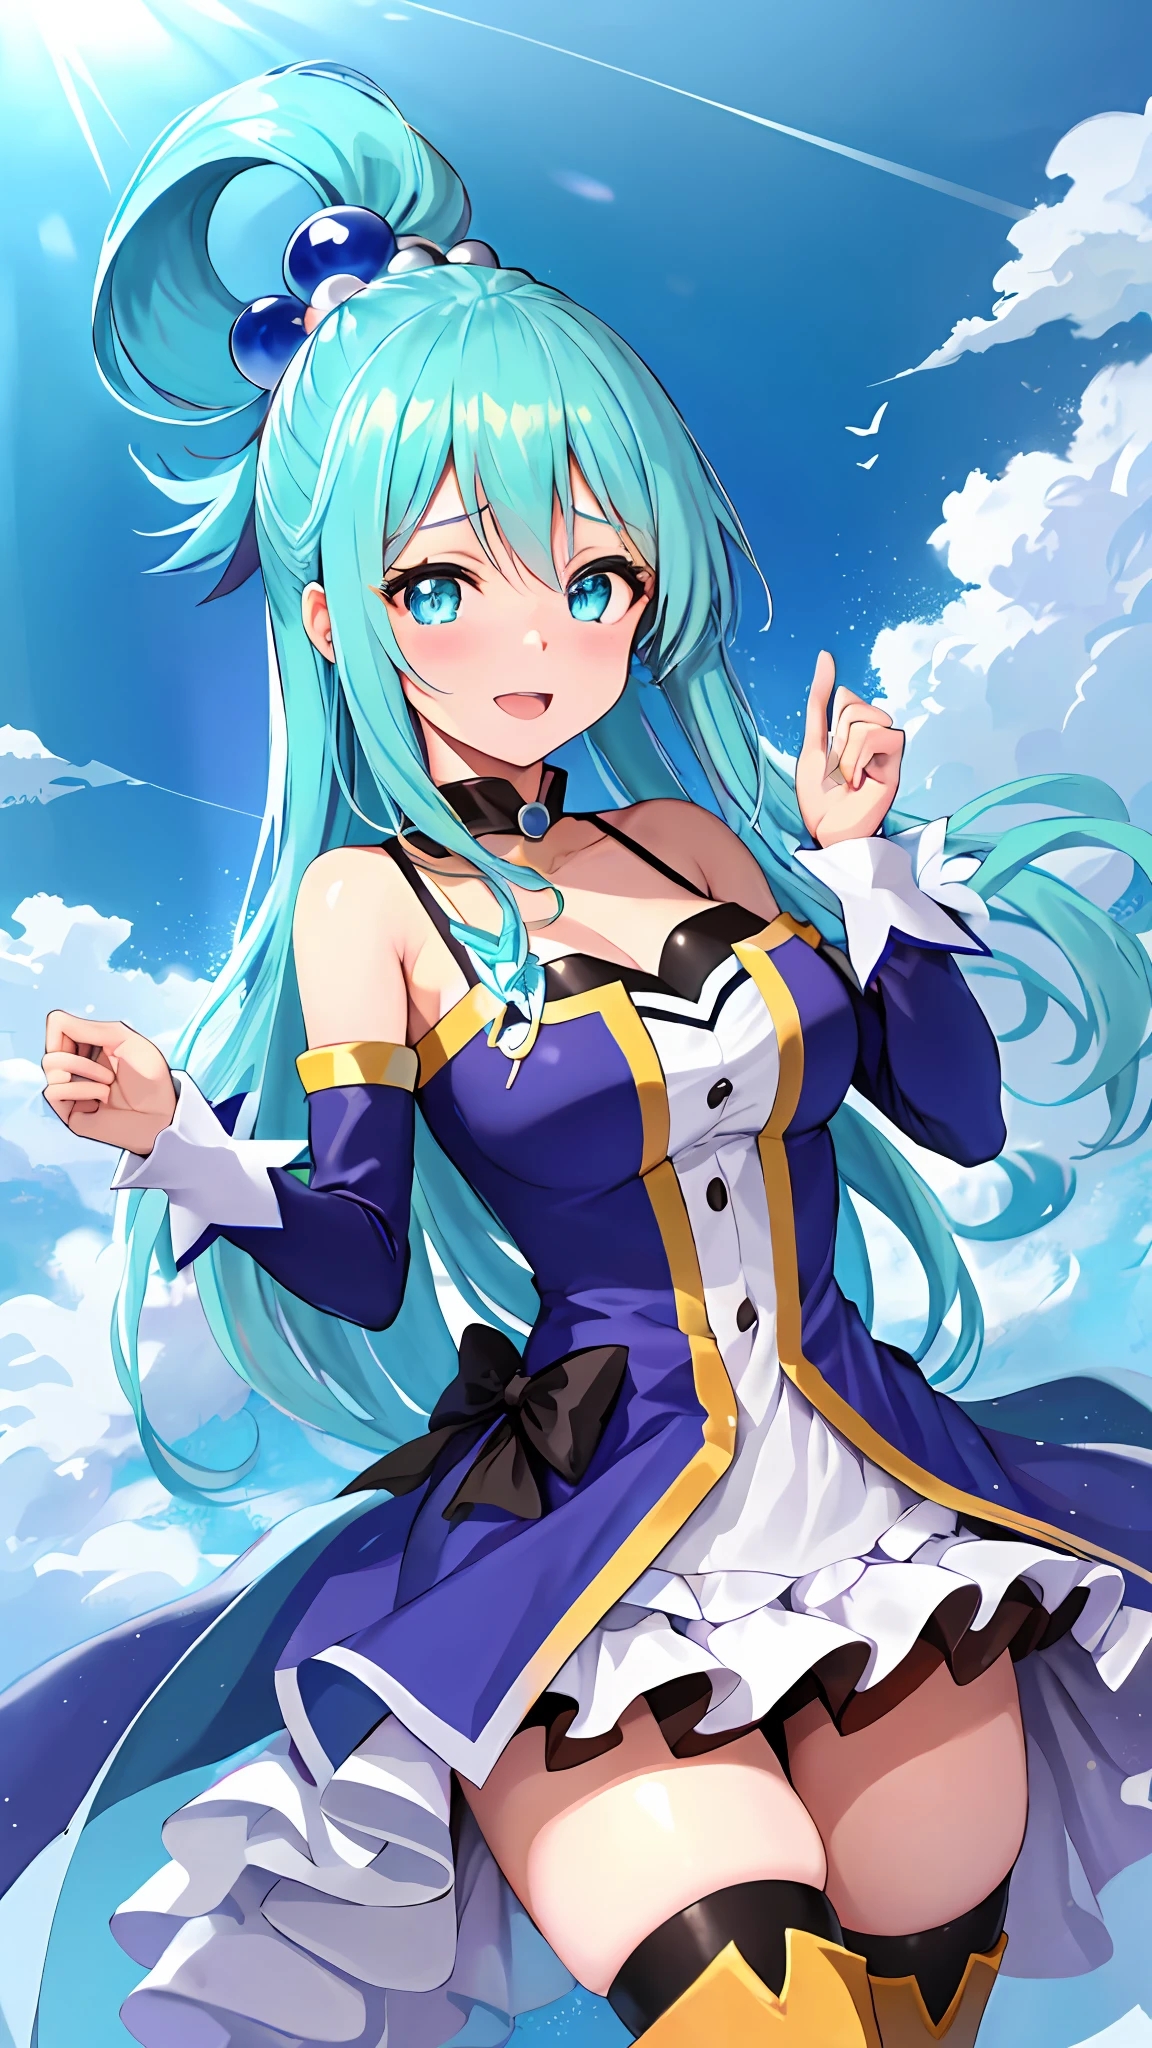 (extremely high quality), Ultra High Definition, High definition, ((master part)), animation, 18 year old konosuba anime woman (aqua) , White beautiful skin, Beauthfull, Beautiful blue hair, bob cut, red flower hair ornament, Beautiful blue eyes, smiling gently, beautiful white floral kimono, detailed florist, upperbody, Kpop idol,  alone, Big, handsome guy, watering flowers with a watering can, olhos gentis,